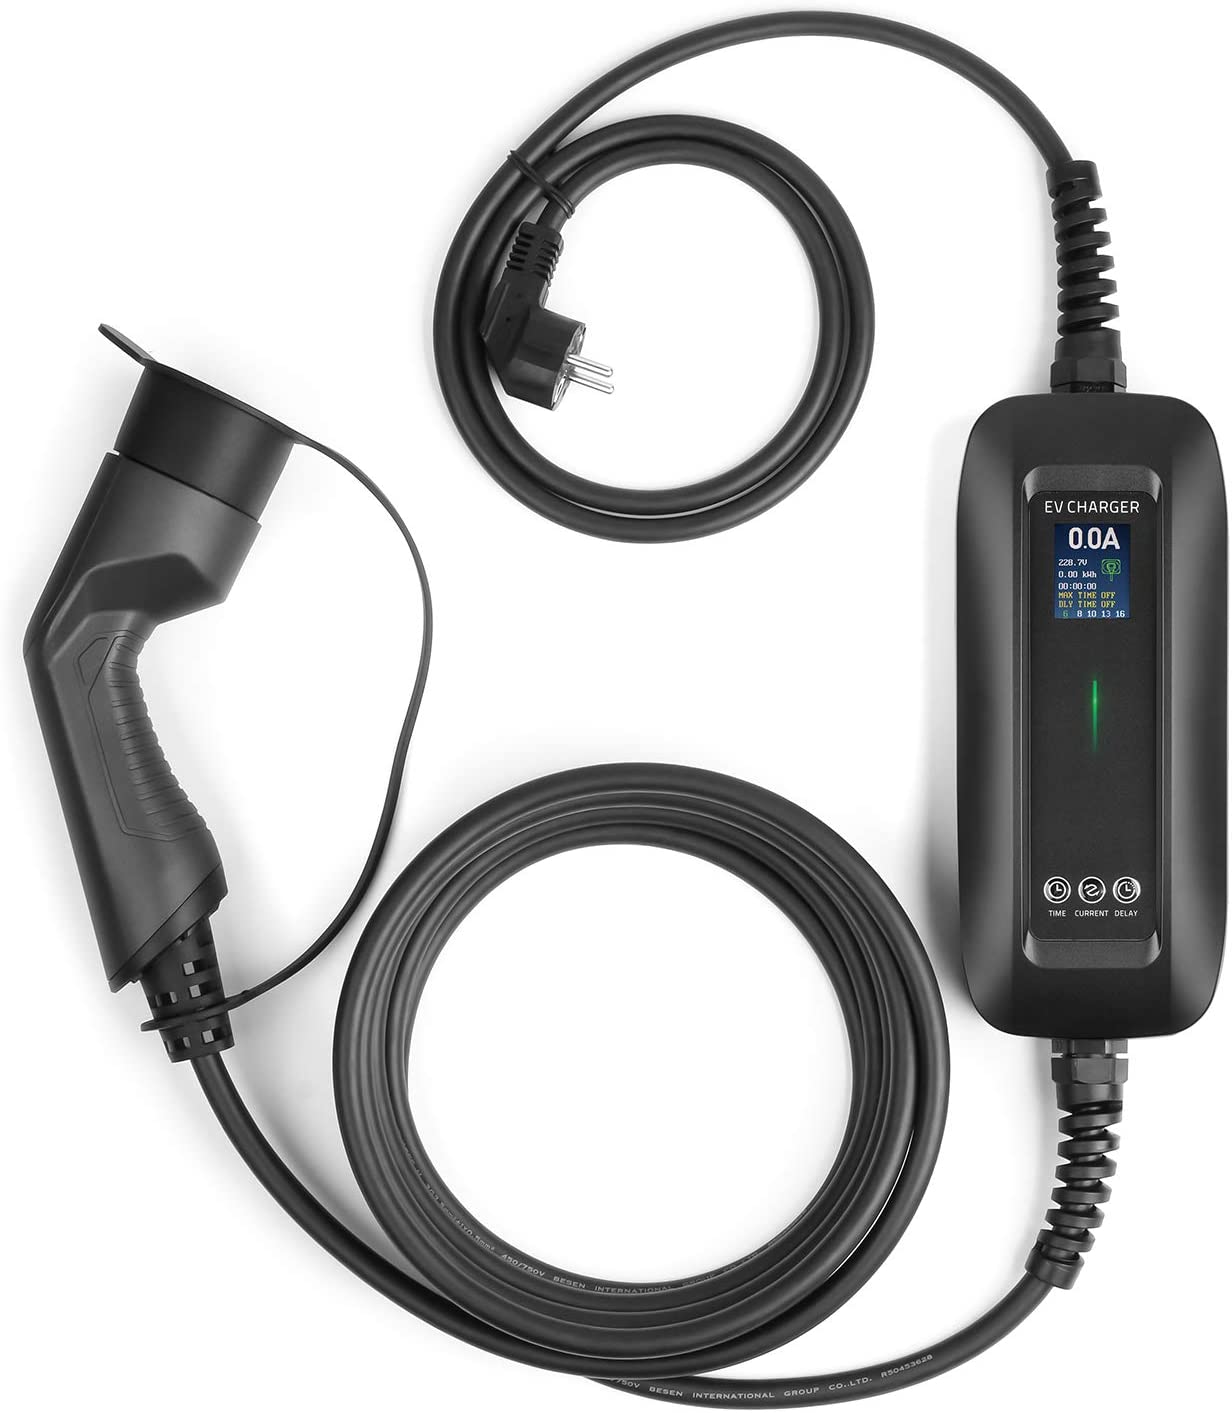 Chargeur nomade VL électrique 32A Blootooth/GPRS - Stockfluid